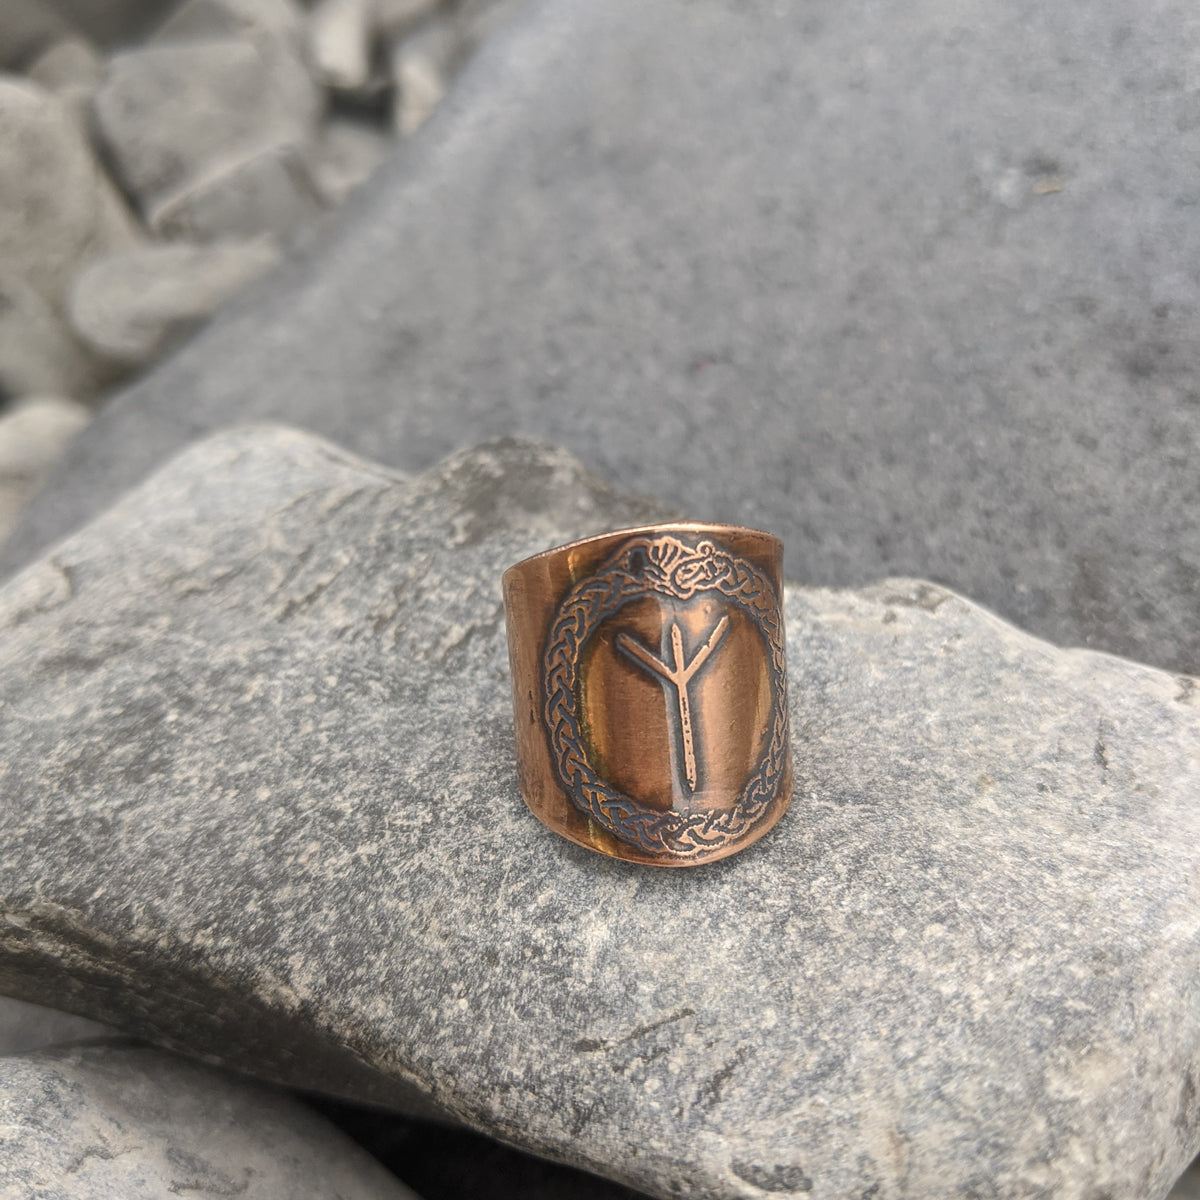 Rune shield ring (Younger Futhark) Copper